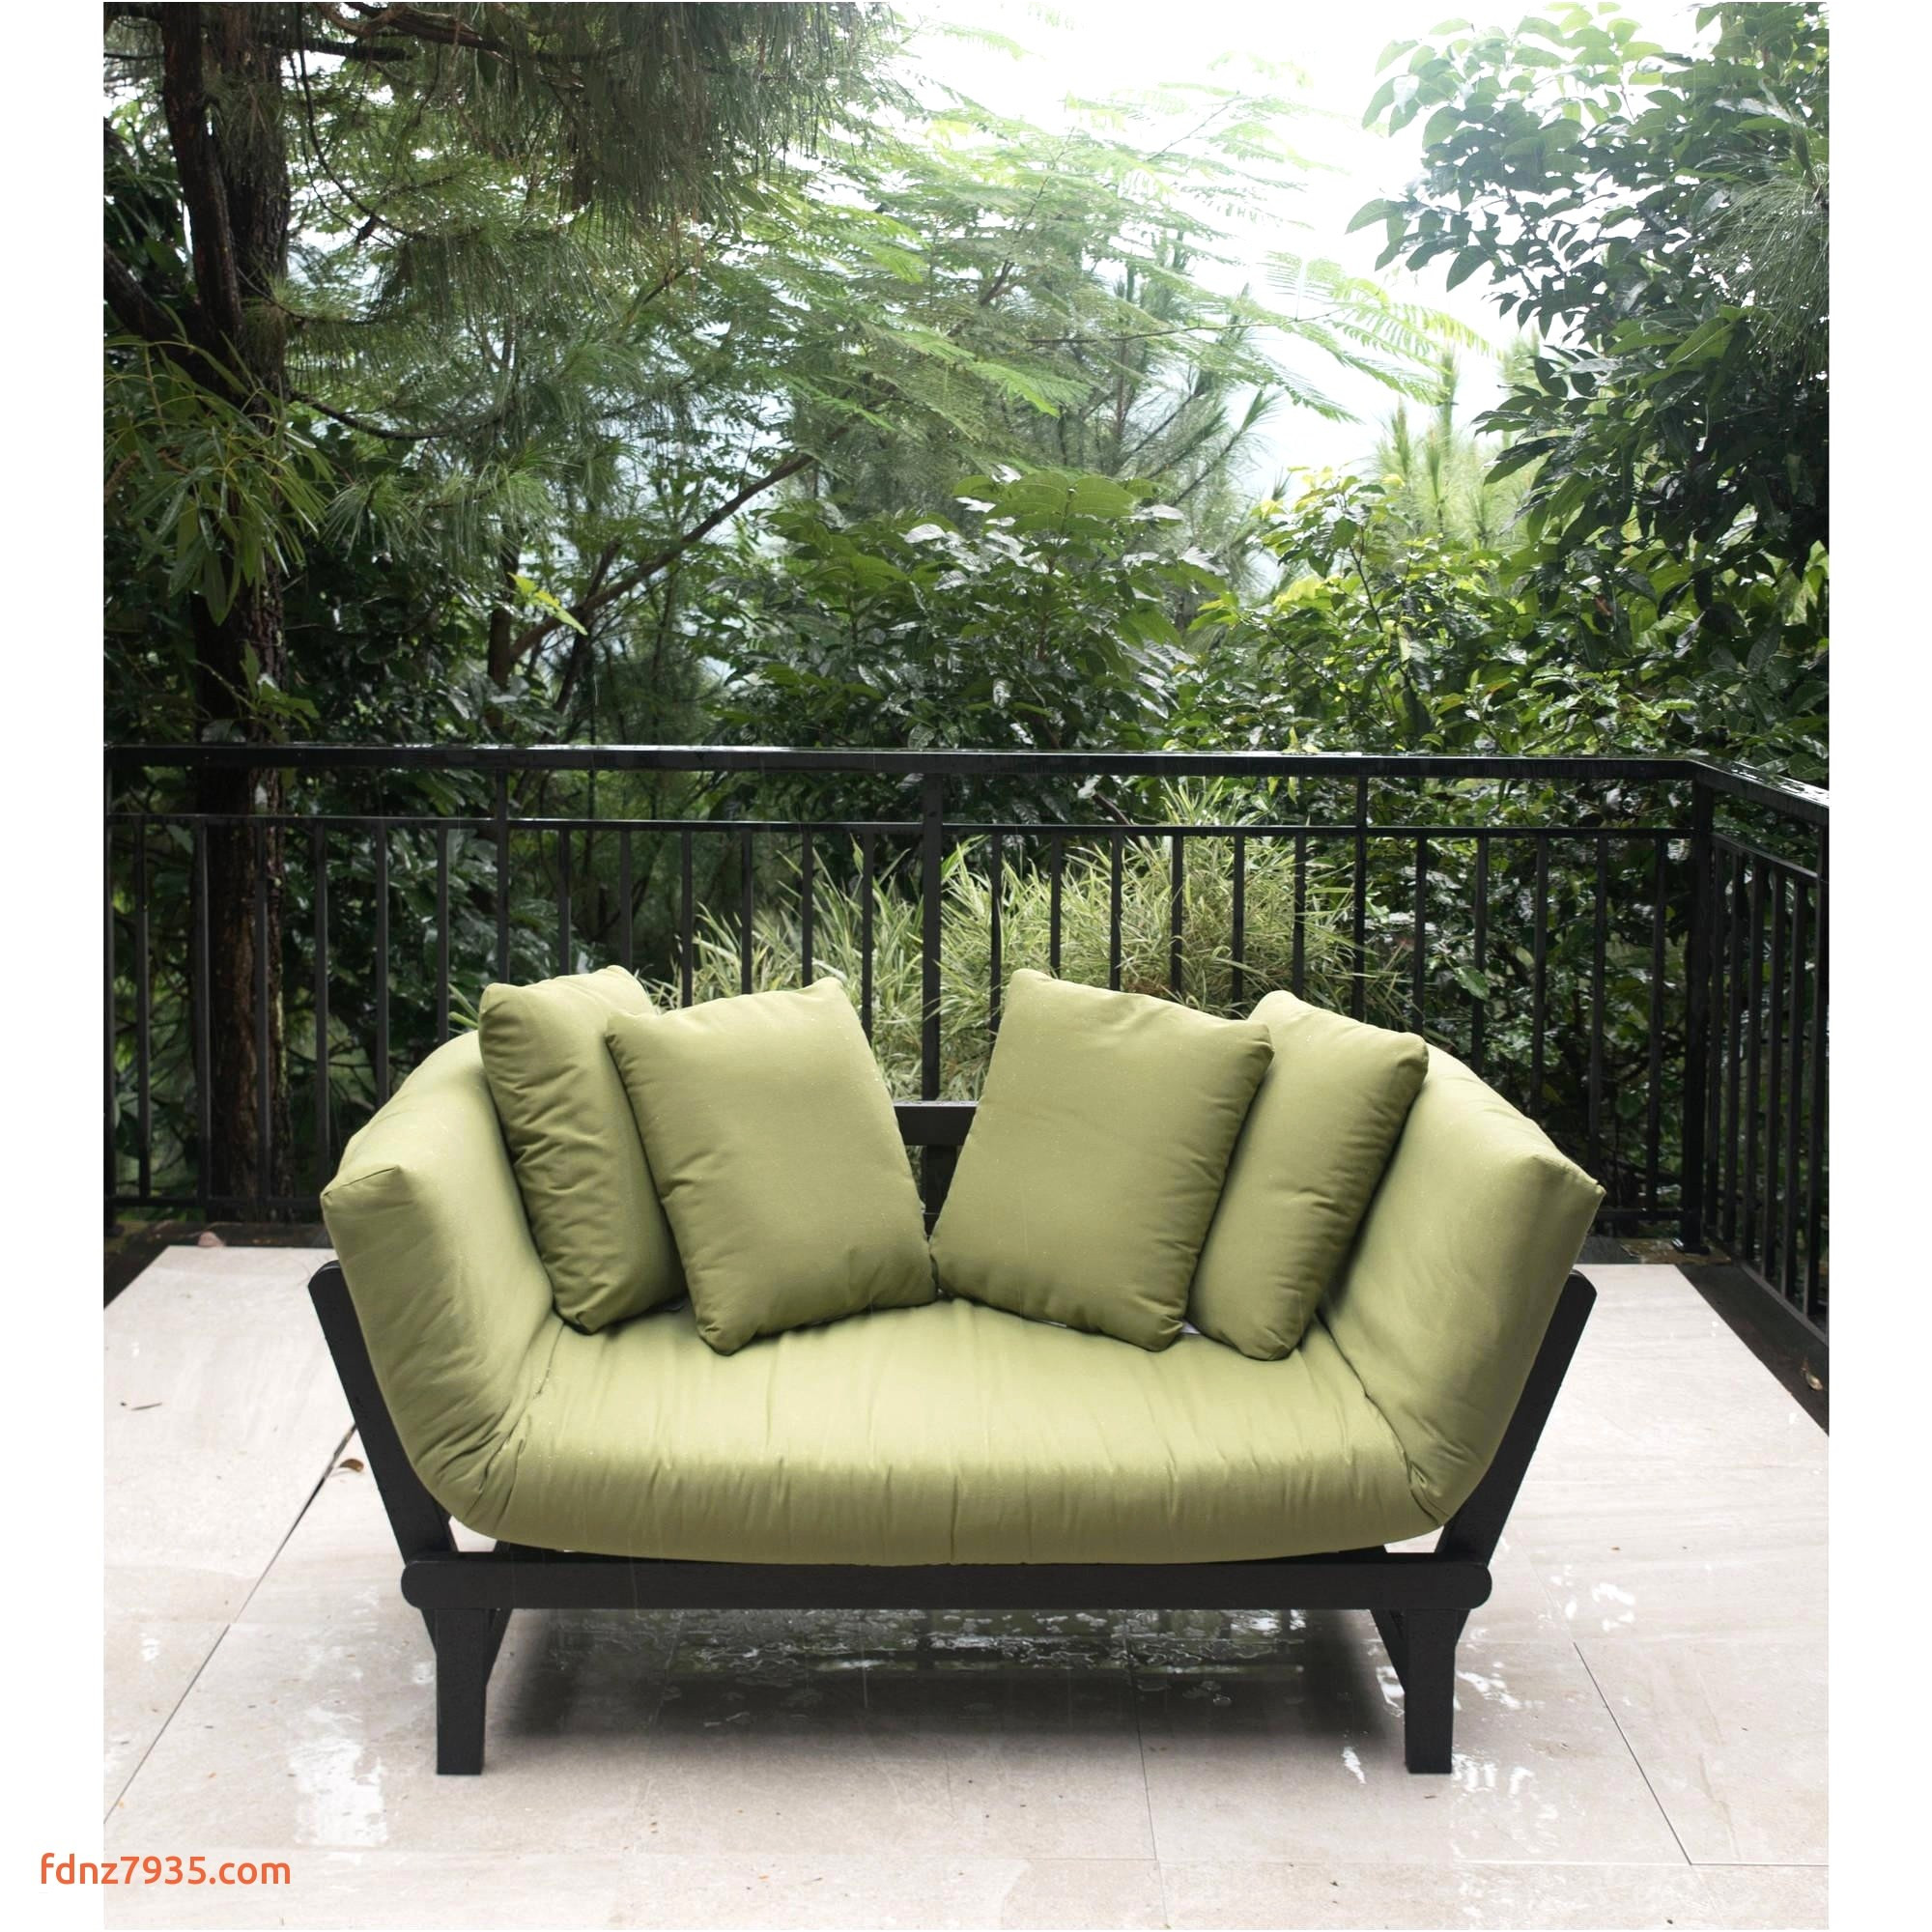 patio furniture cleaner new learning patio awesome patio loveseat 0d tags awesome luxury patio patio